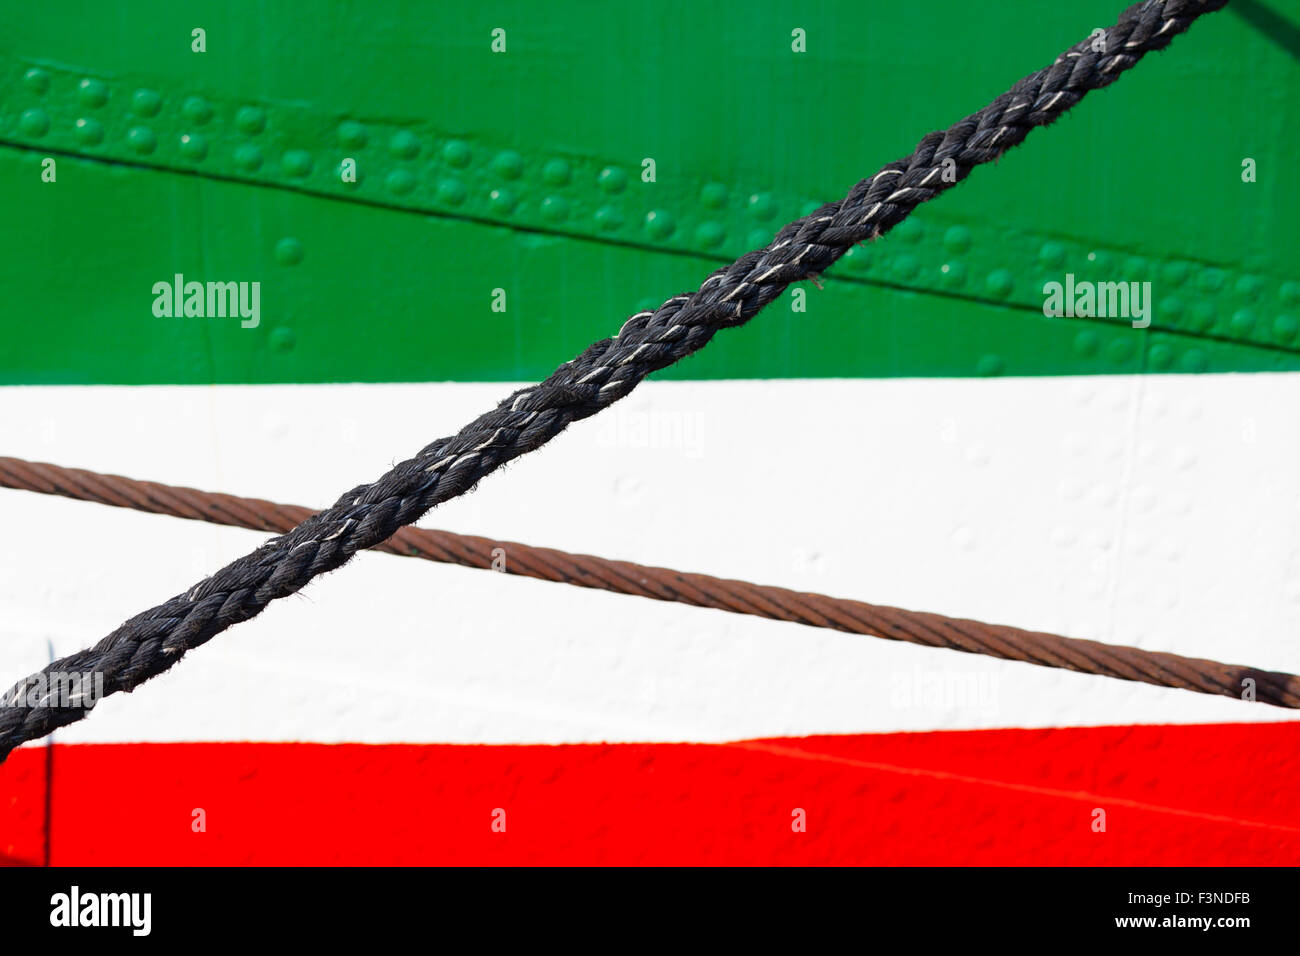 A colorful ship hull in green, white and red with some ropes. Stock Photo